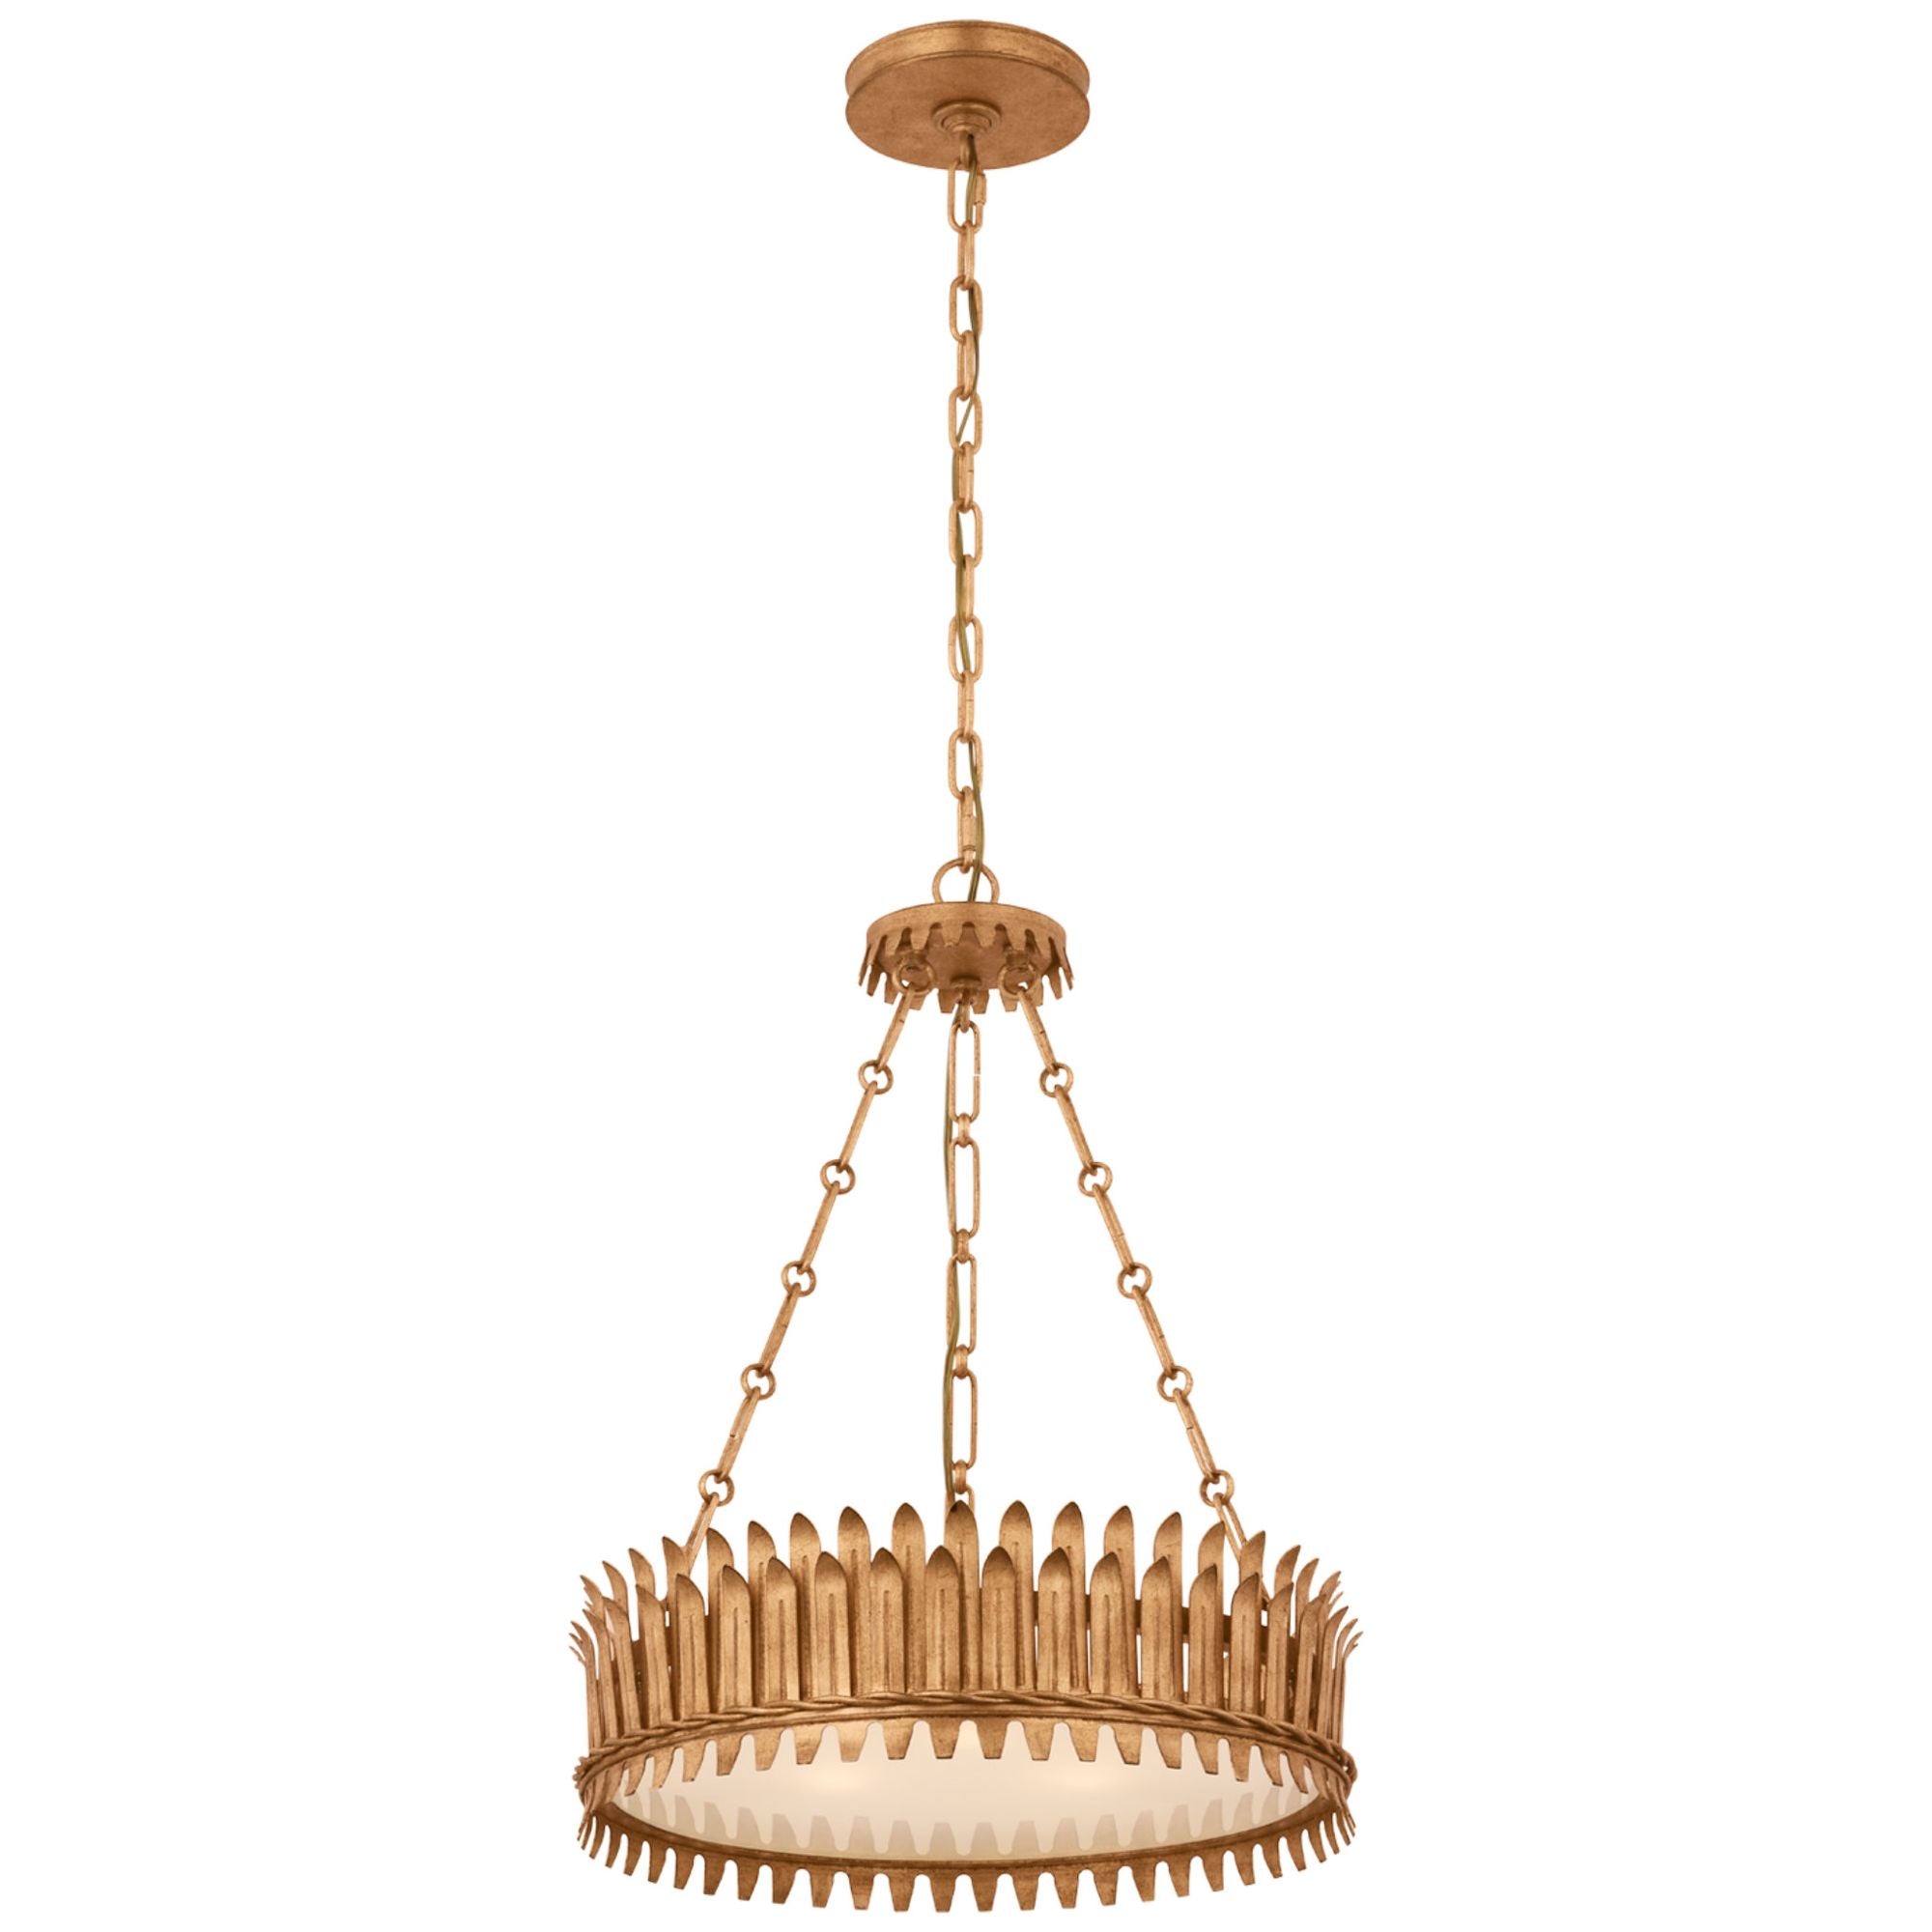 Suzanne Kasler Leslie 18" Chandelier in Gilded Iron with Frosted Acrylic